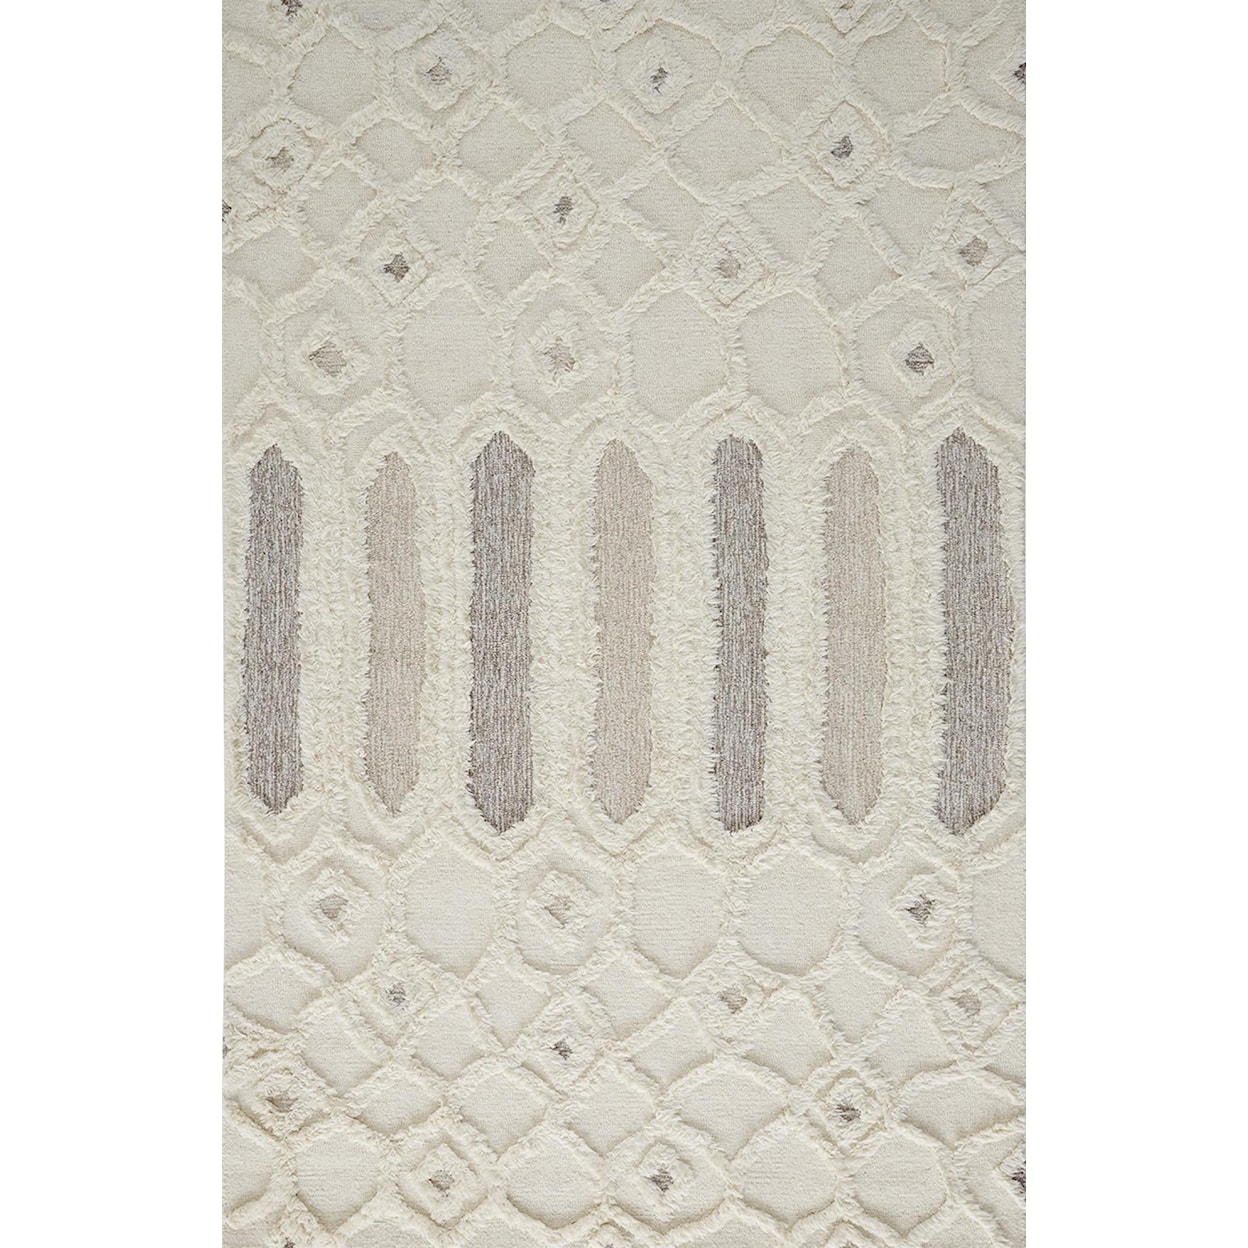 Feizy Rugs Anica 8 x 10 Area Rug